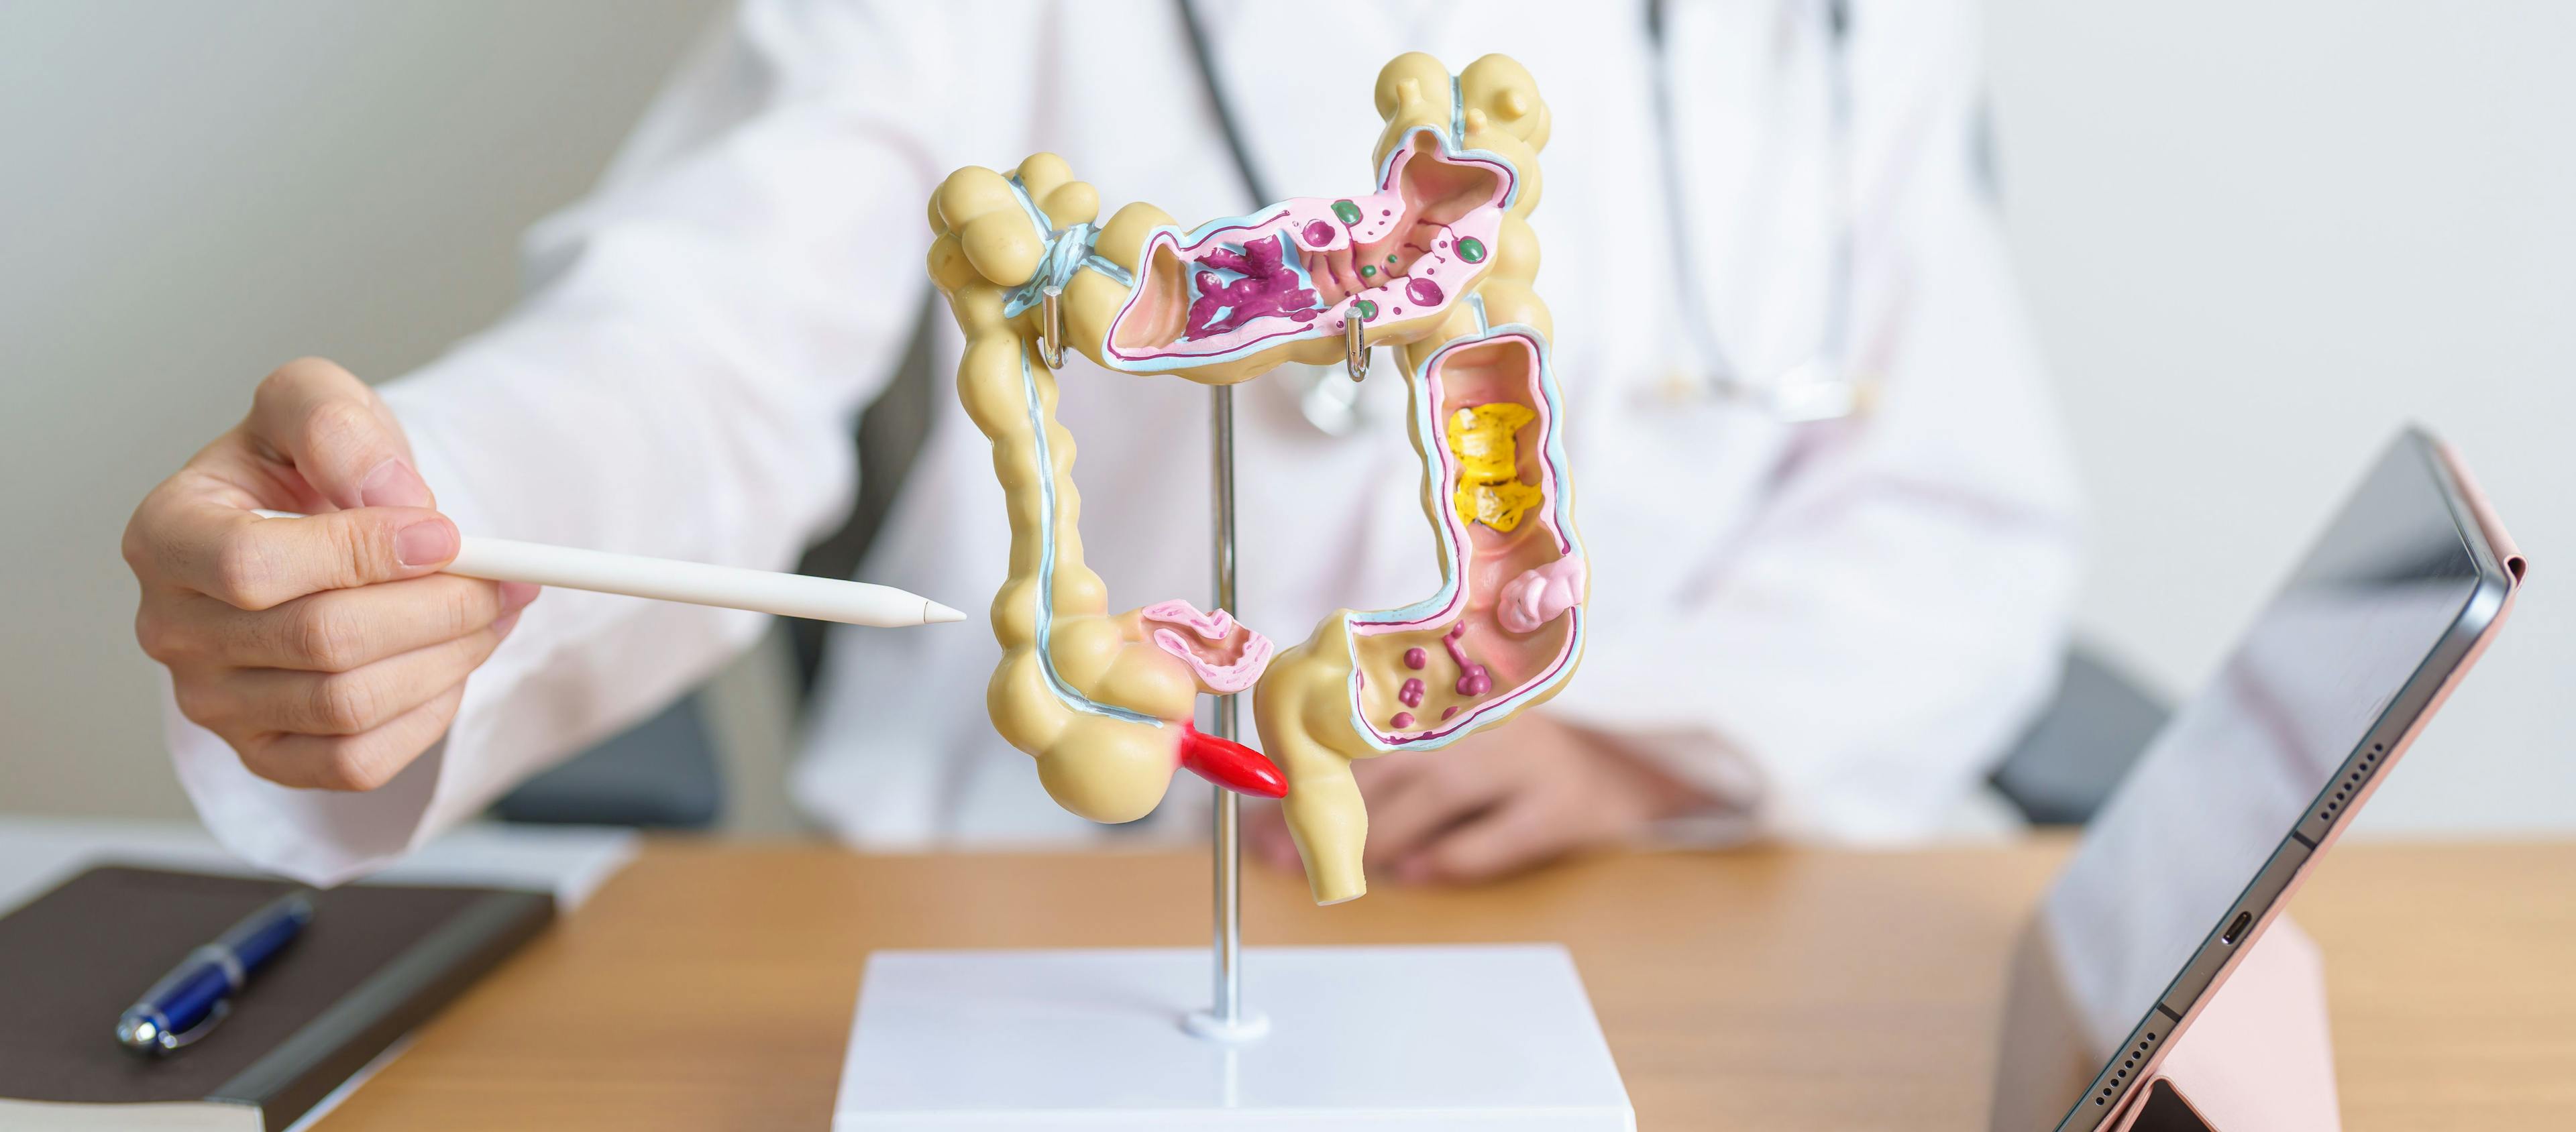 Health care worker presenting a model of the gastrointestinal system